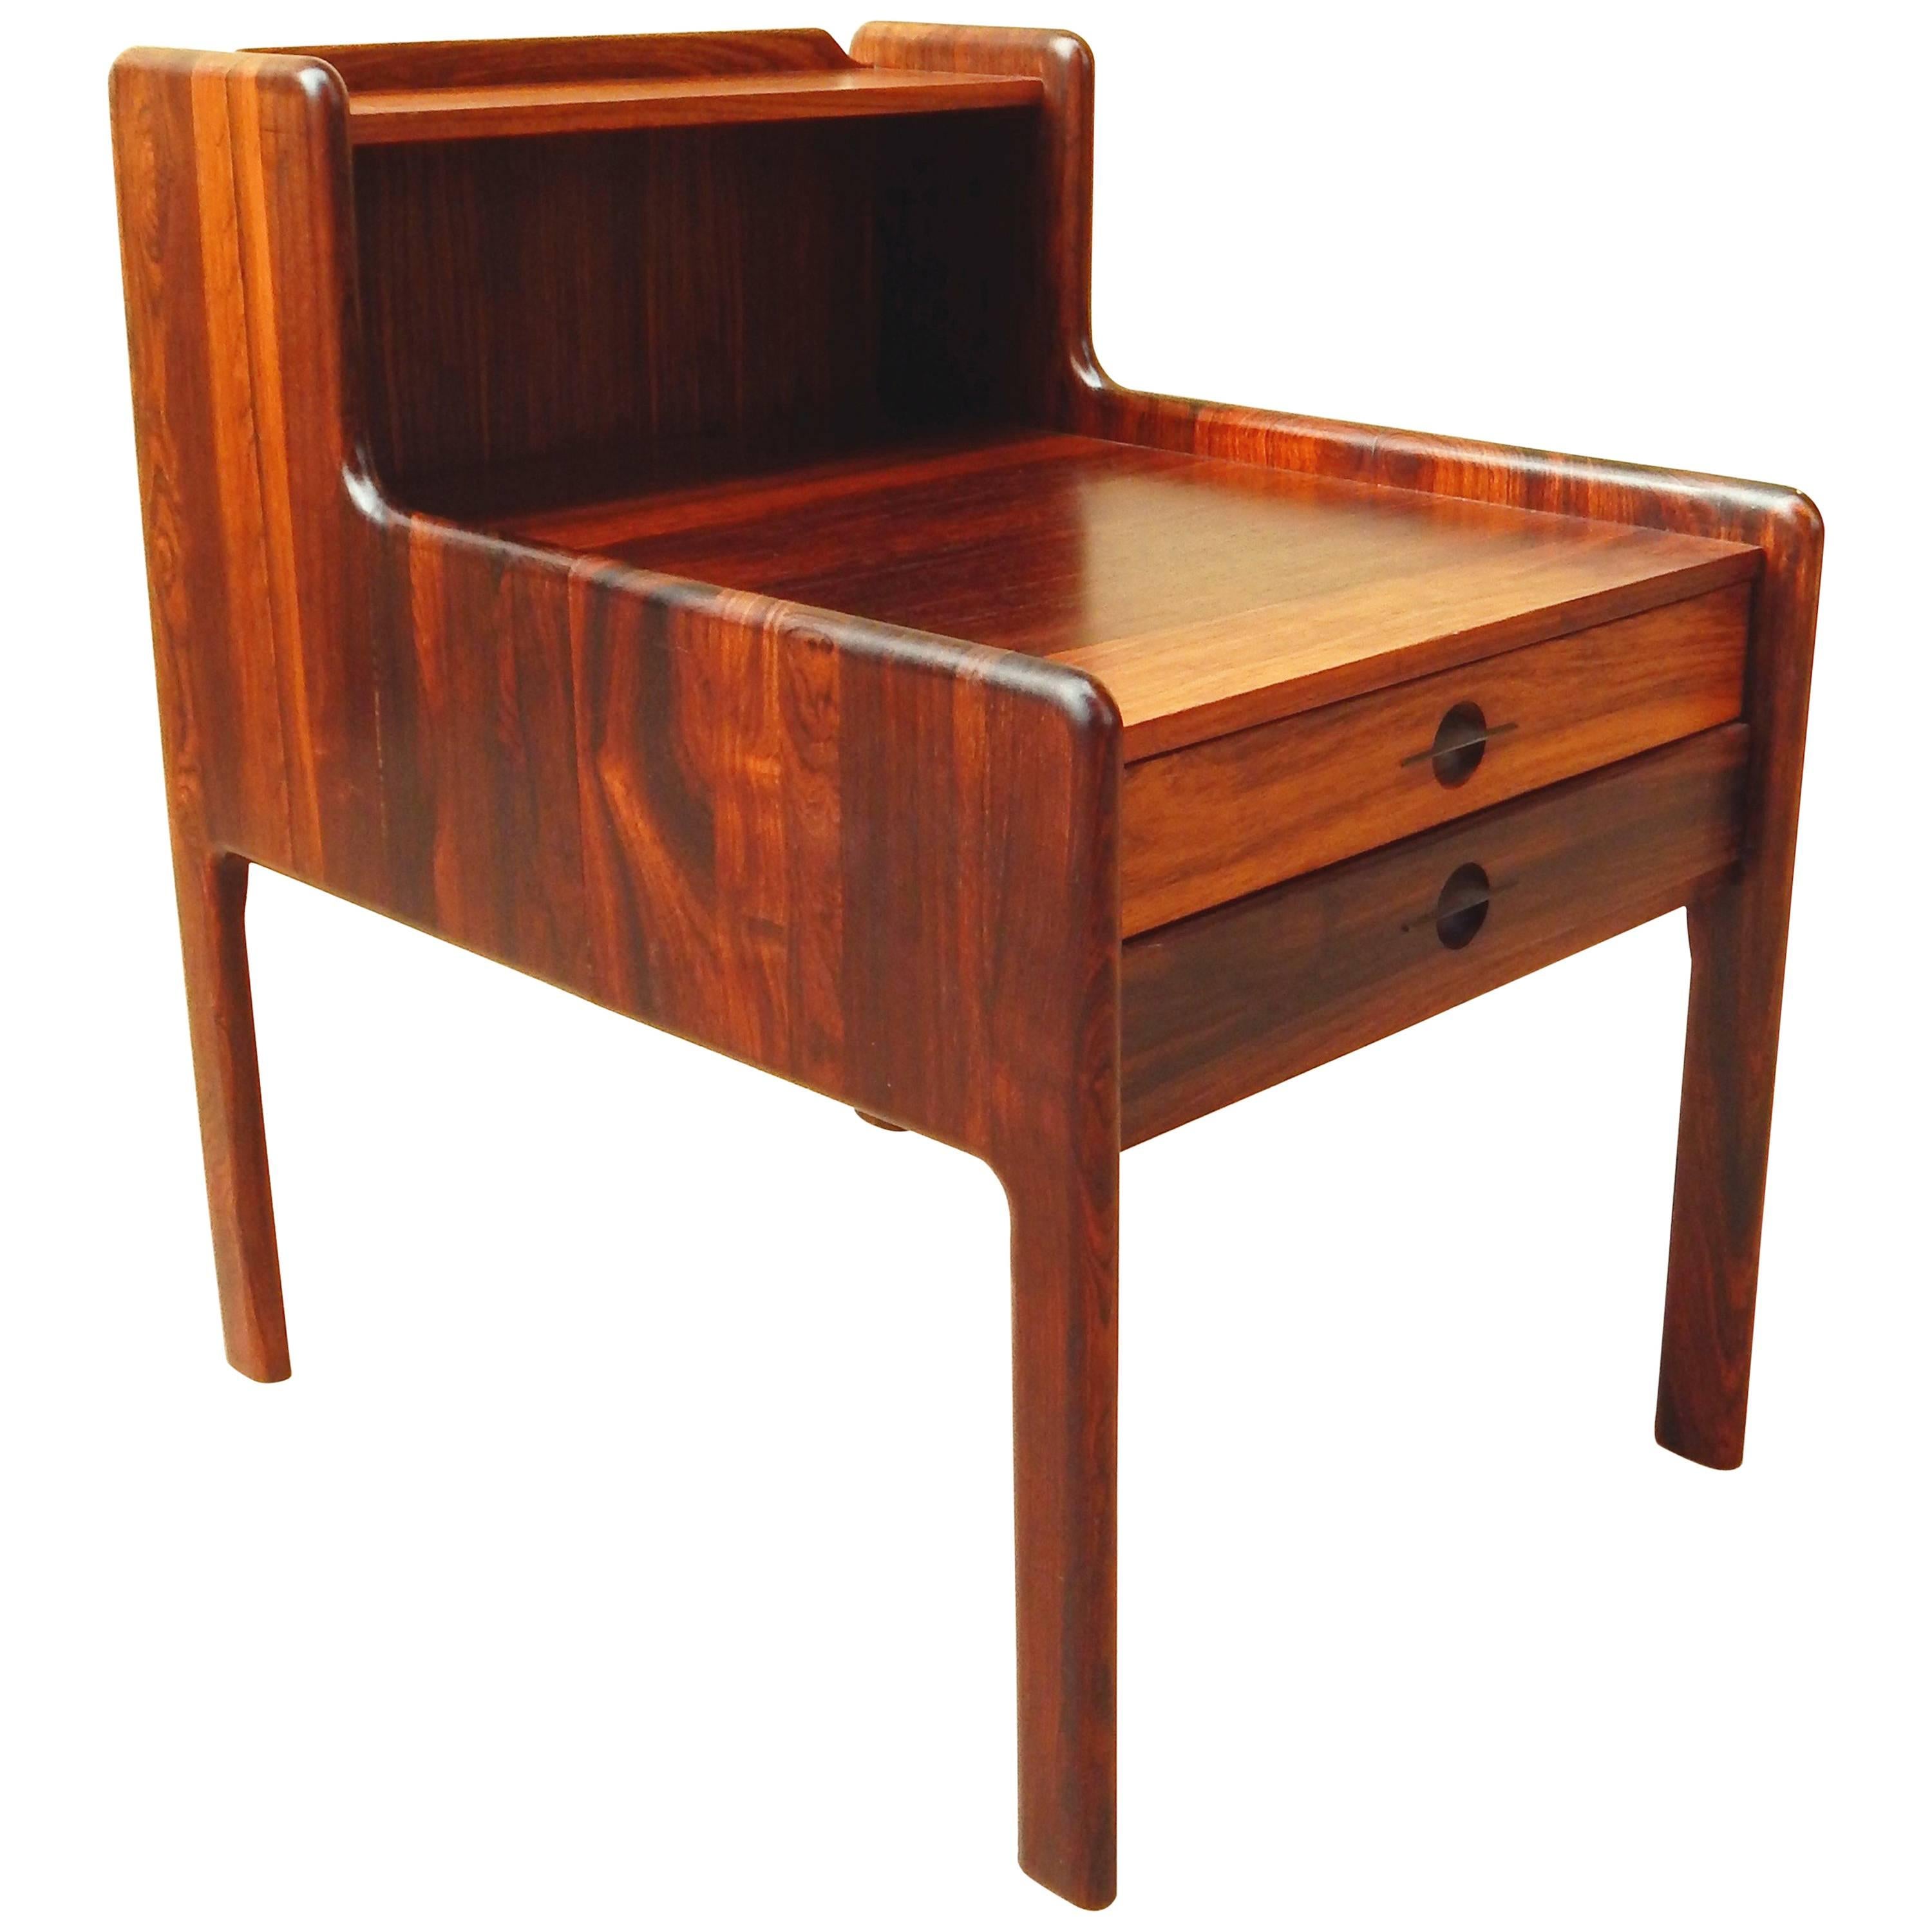 Danish Mid-Century Modern Rosewood Side Table, circa 1960 For Sale